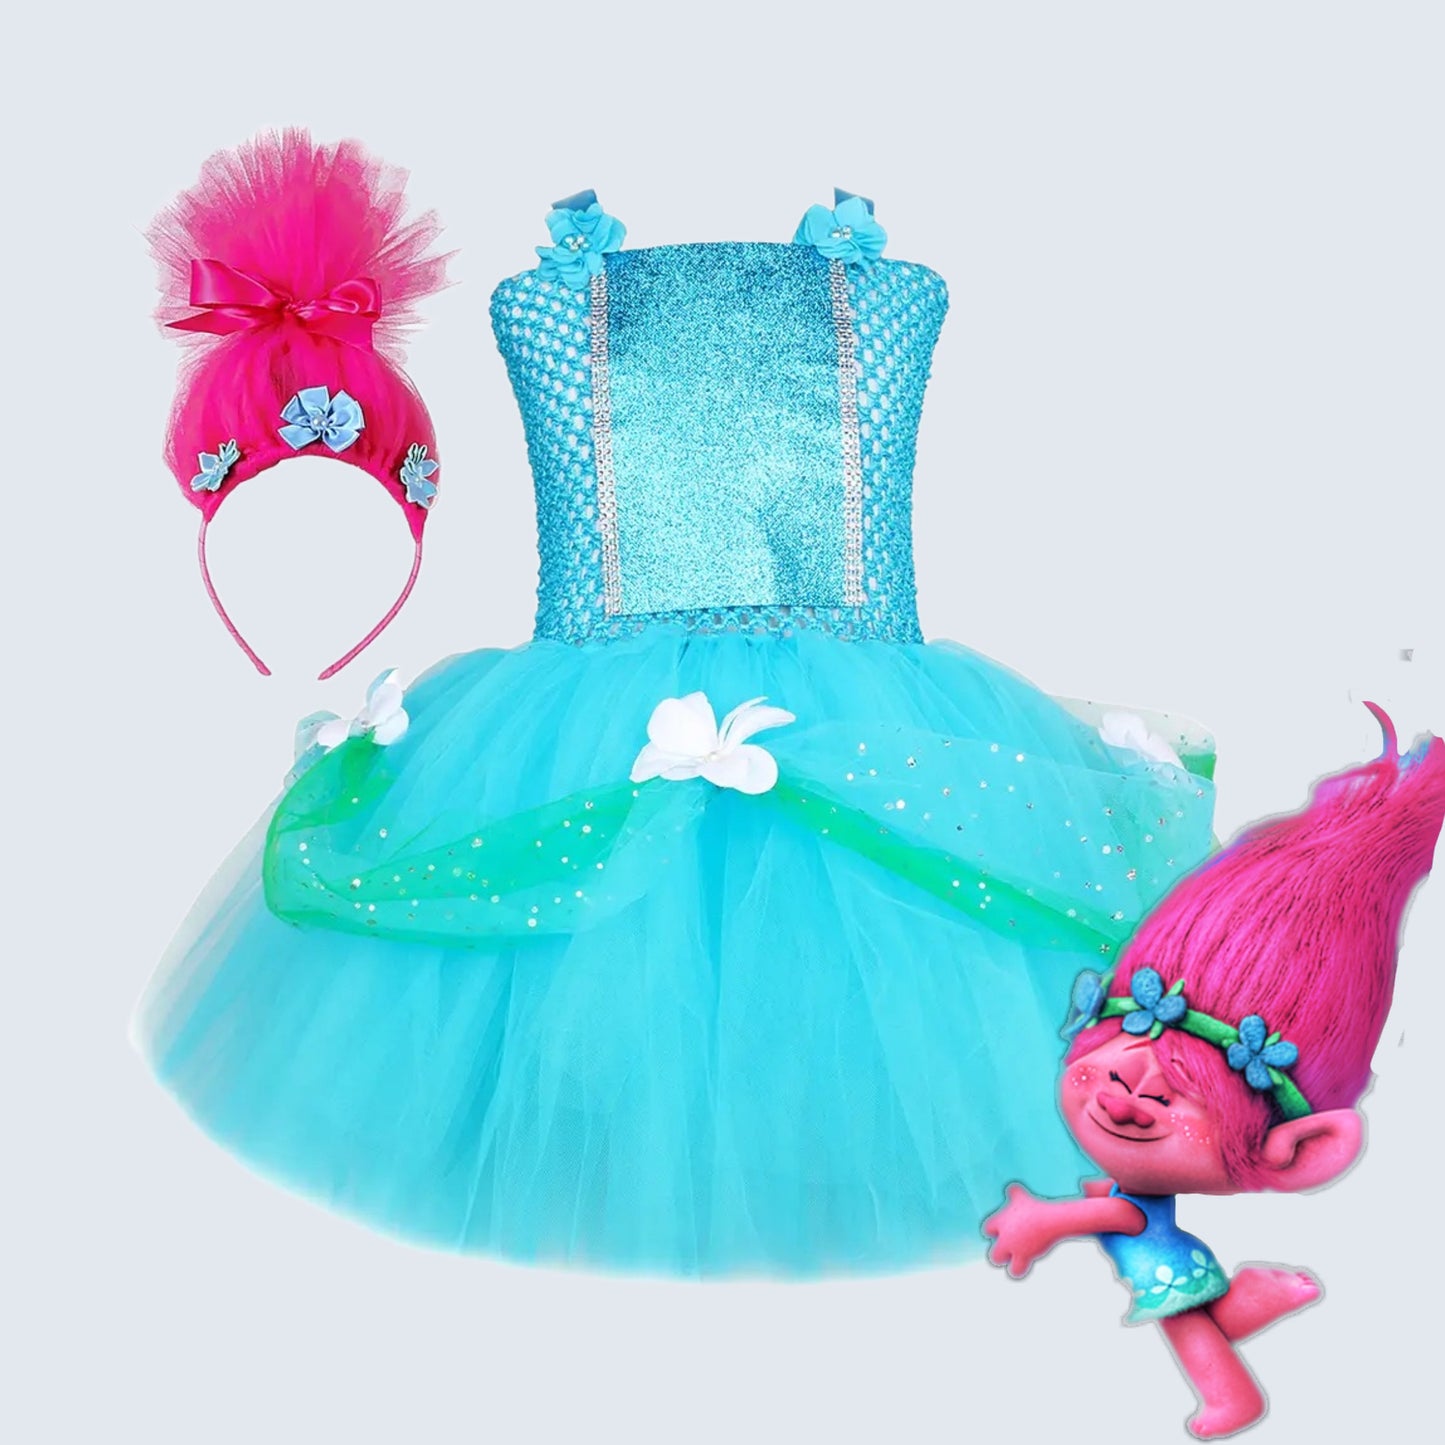 Trolls Poppy Princess Dress for Baby Girls Cosplay Halloween Costumes Kids Birthday Dresses Teenage Girl Clothes Fairy Outfit